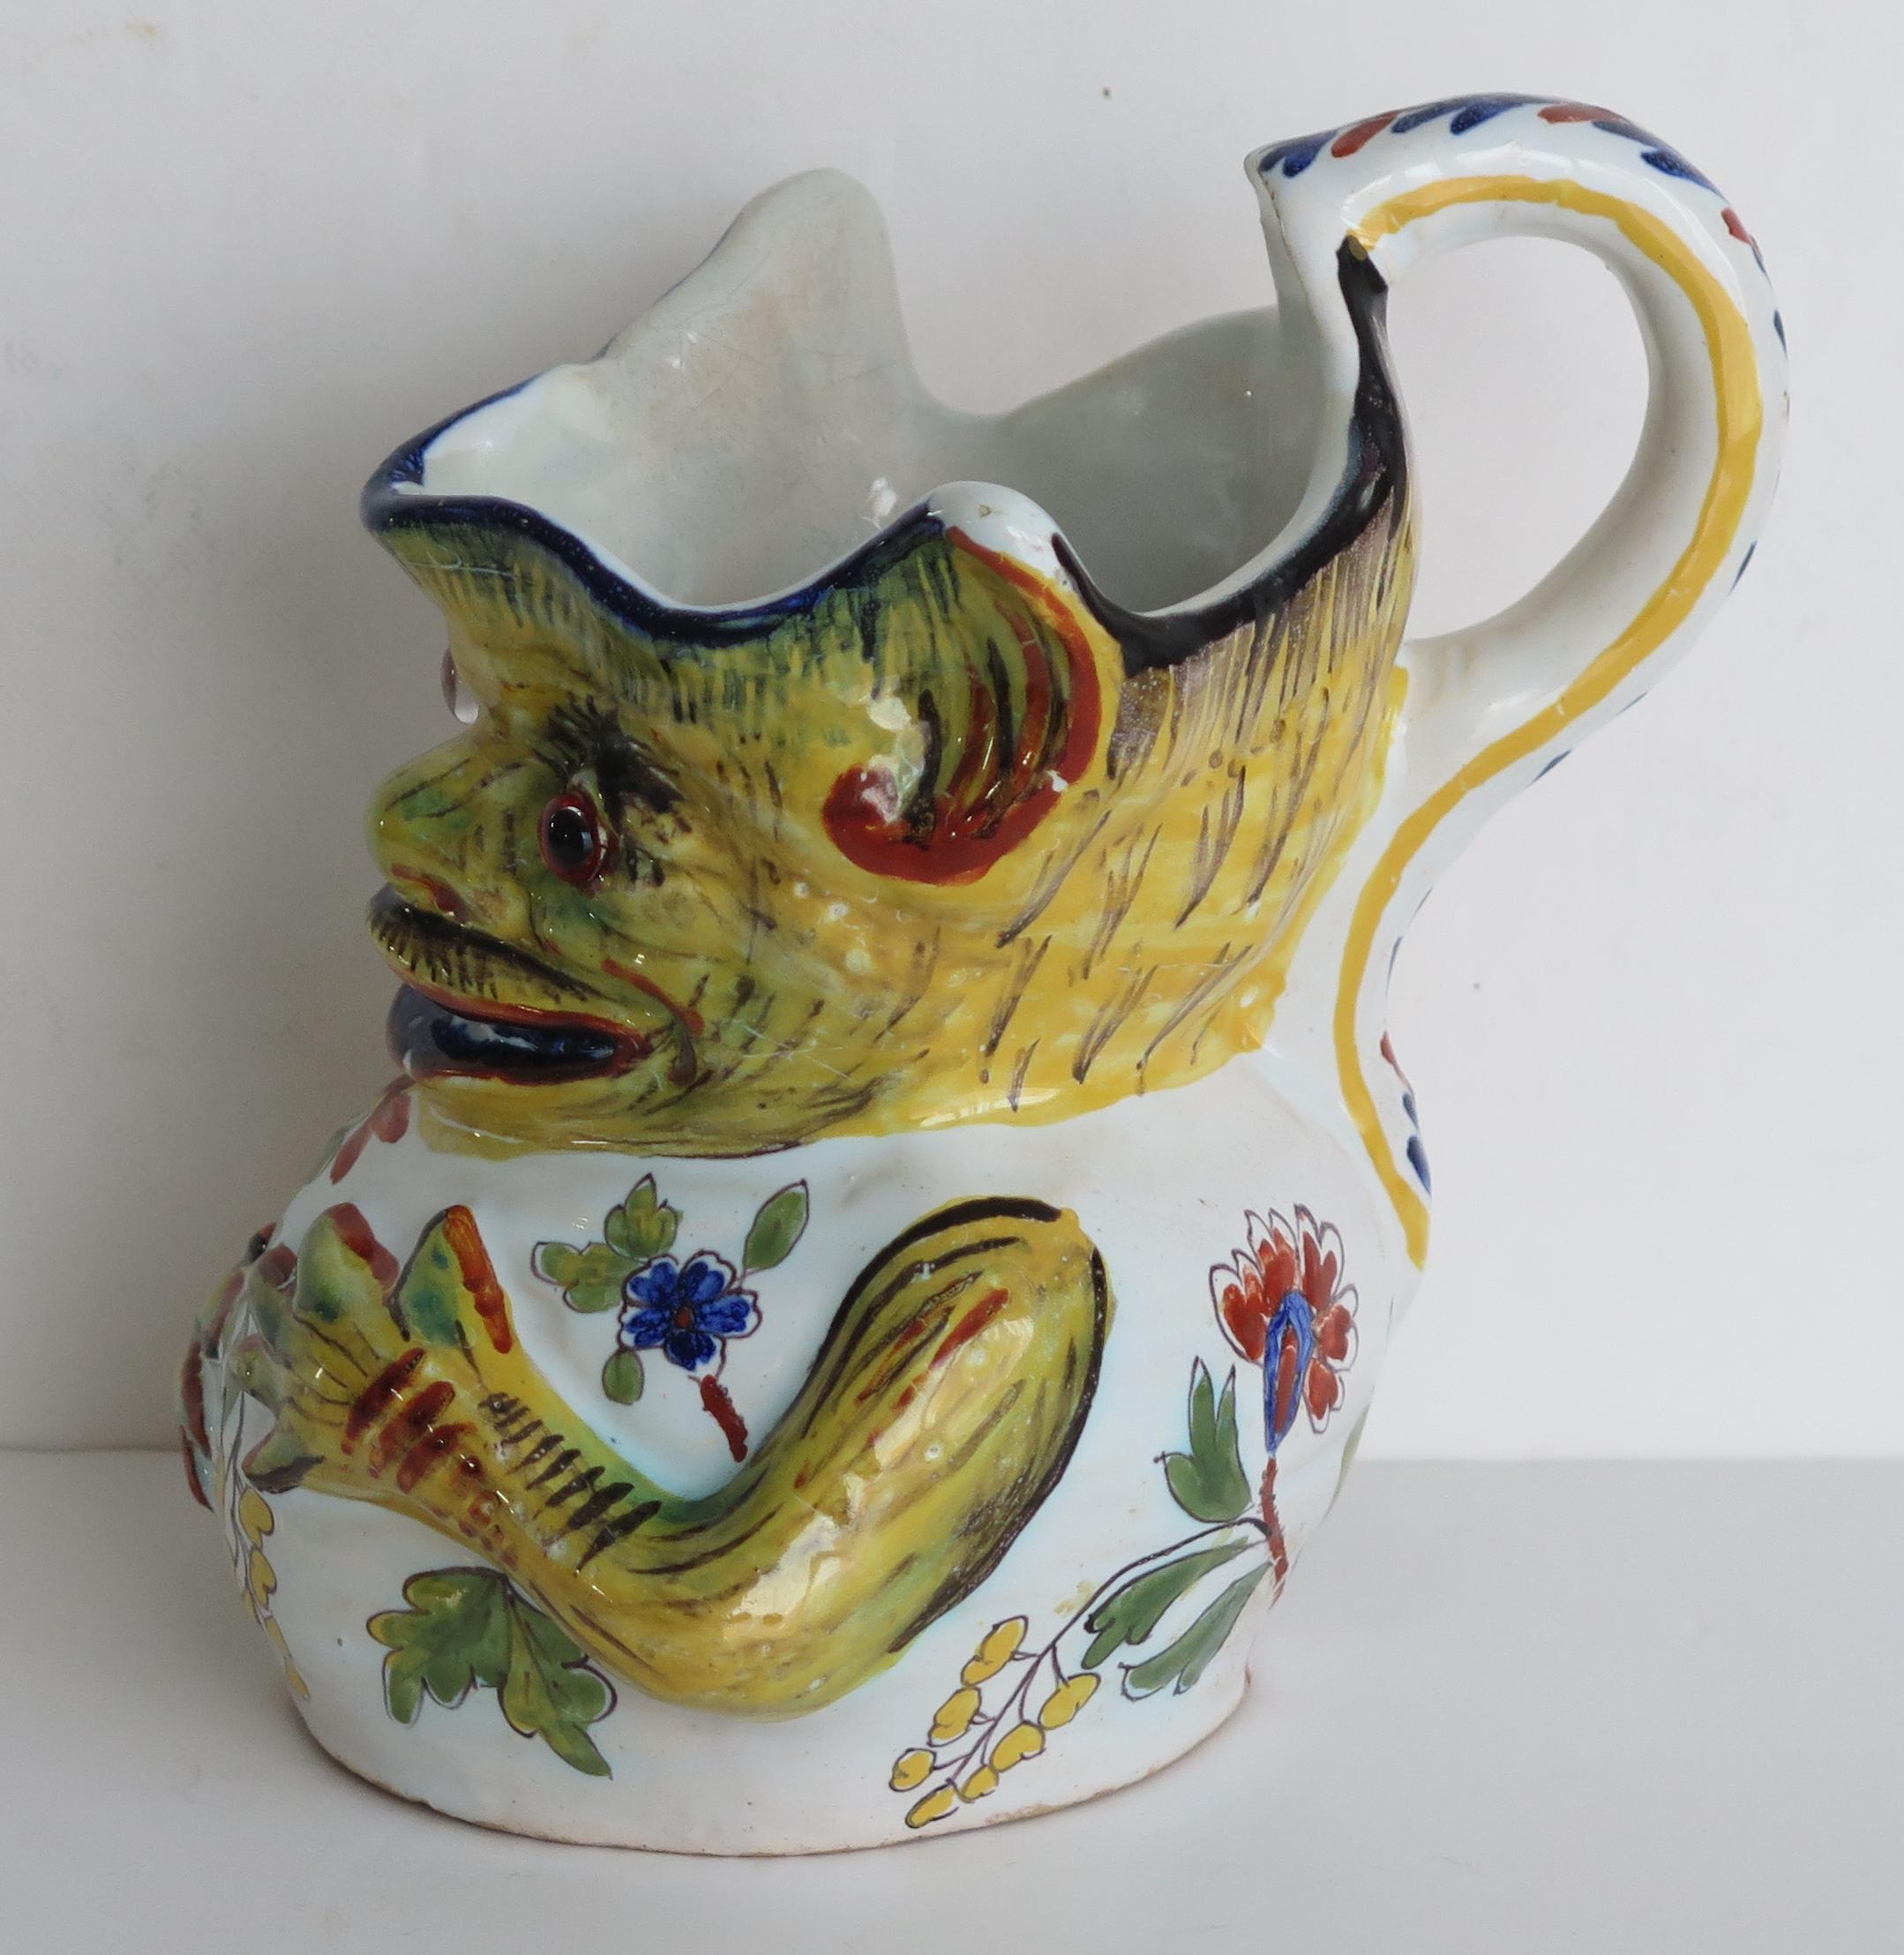 French Provincial Antique French Faience Handpainted Grotesque Jug, Ca 1850